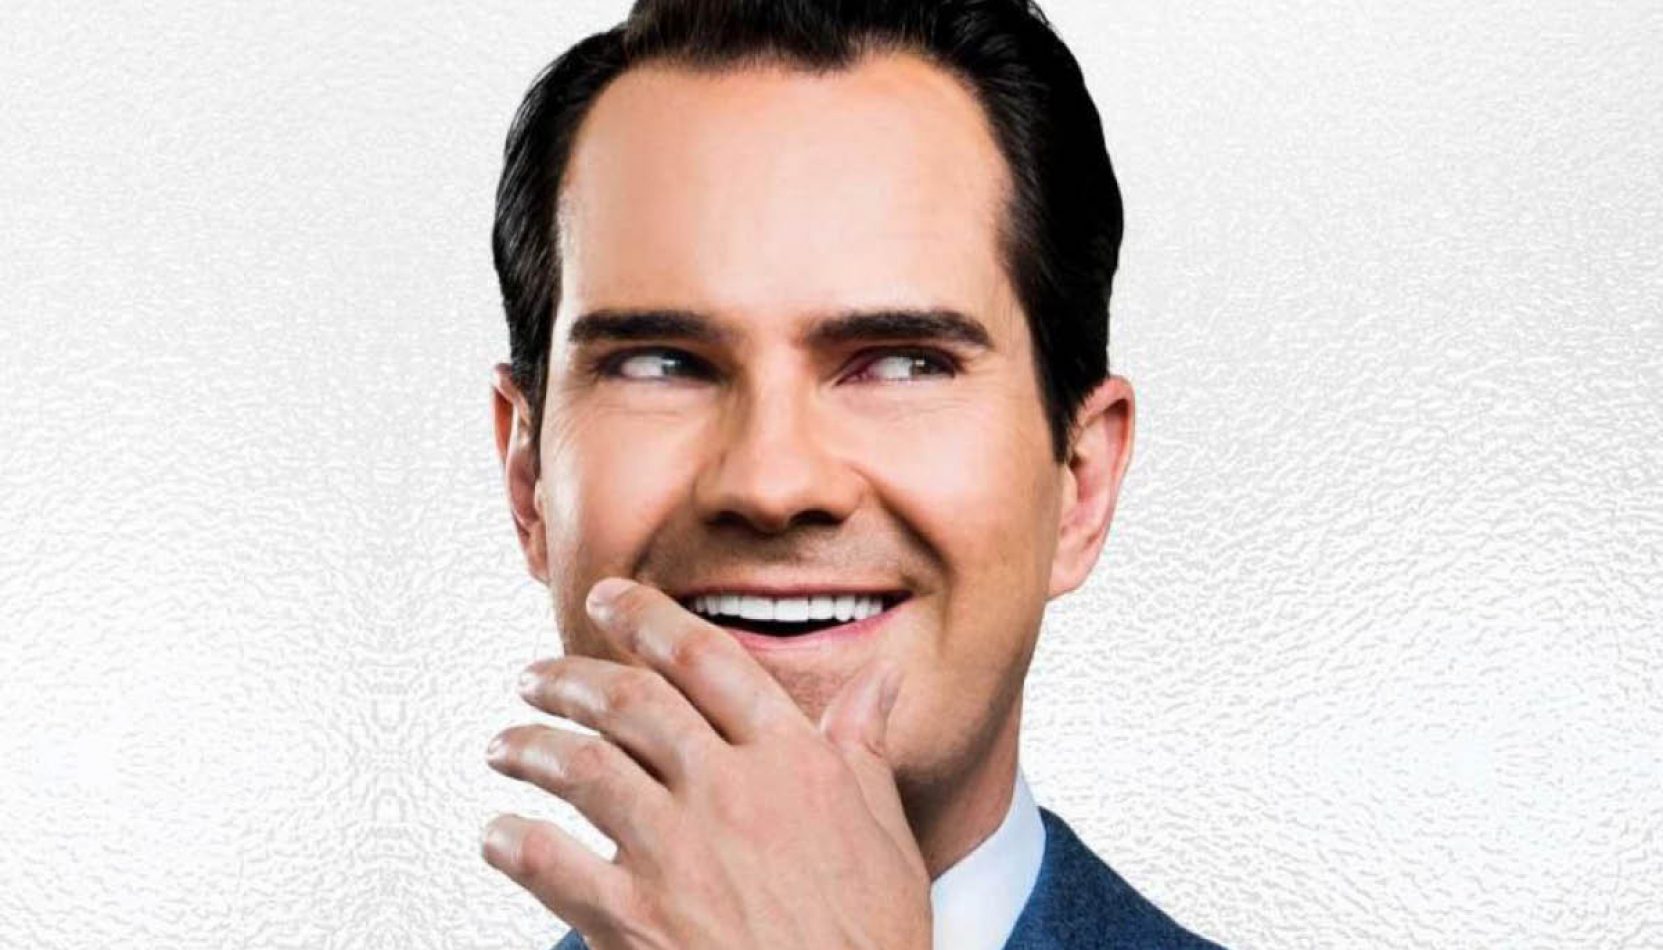 jimmy carr, comedy, new victoria theatre, woking, surrey, guide to surrey, the guide to surrey, the guide to whats on, whats on, things to do, whats on this August, events, gigs, whats on, guide to woking, august 2021